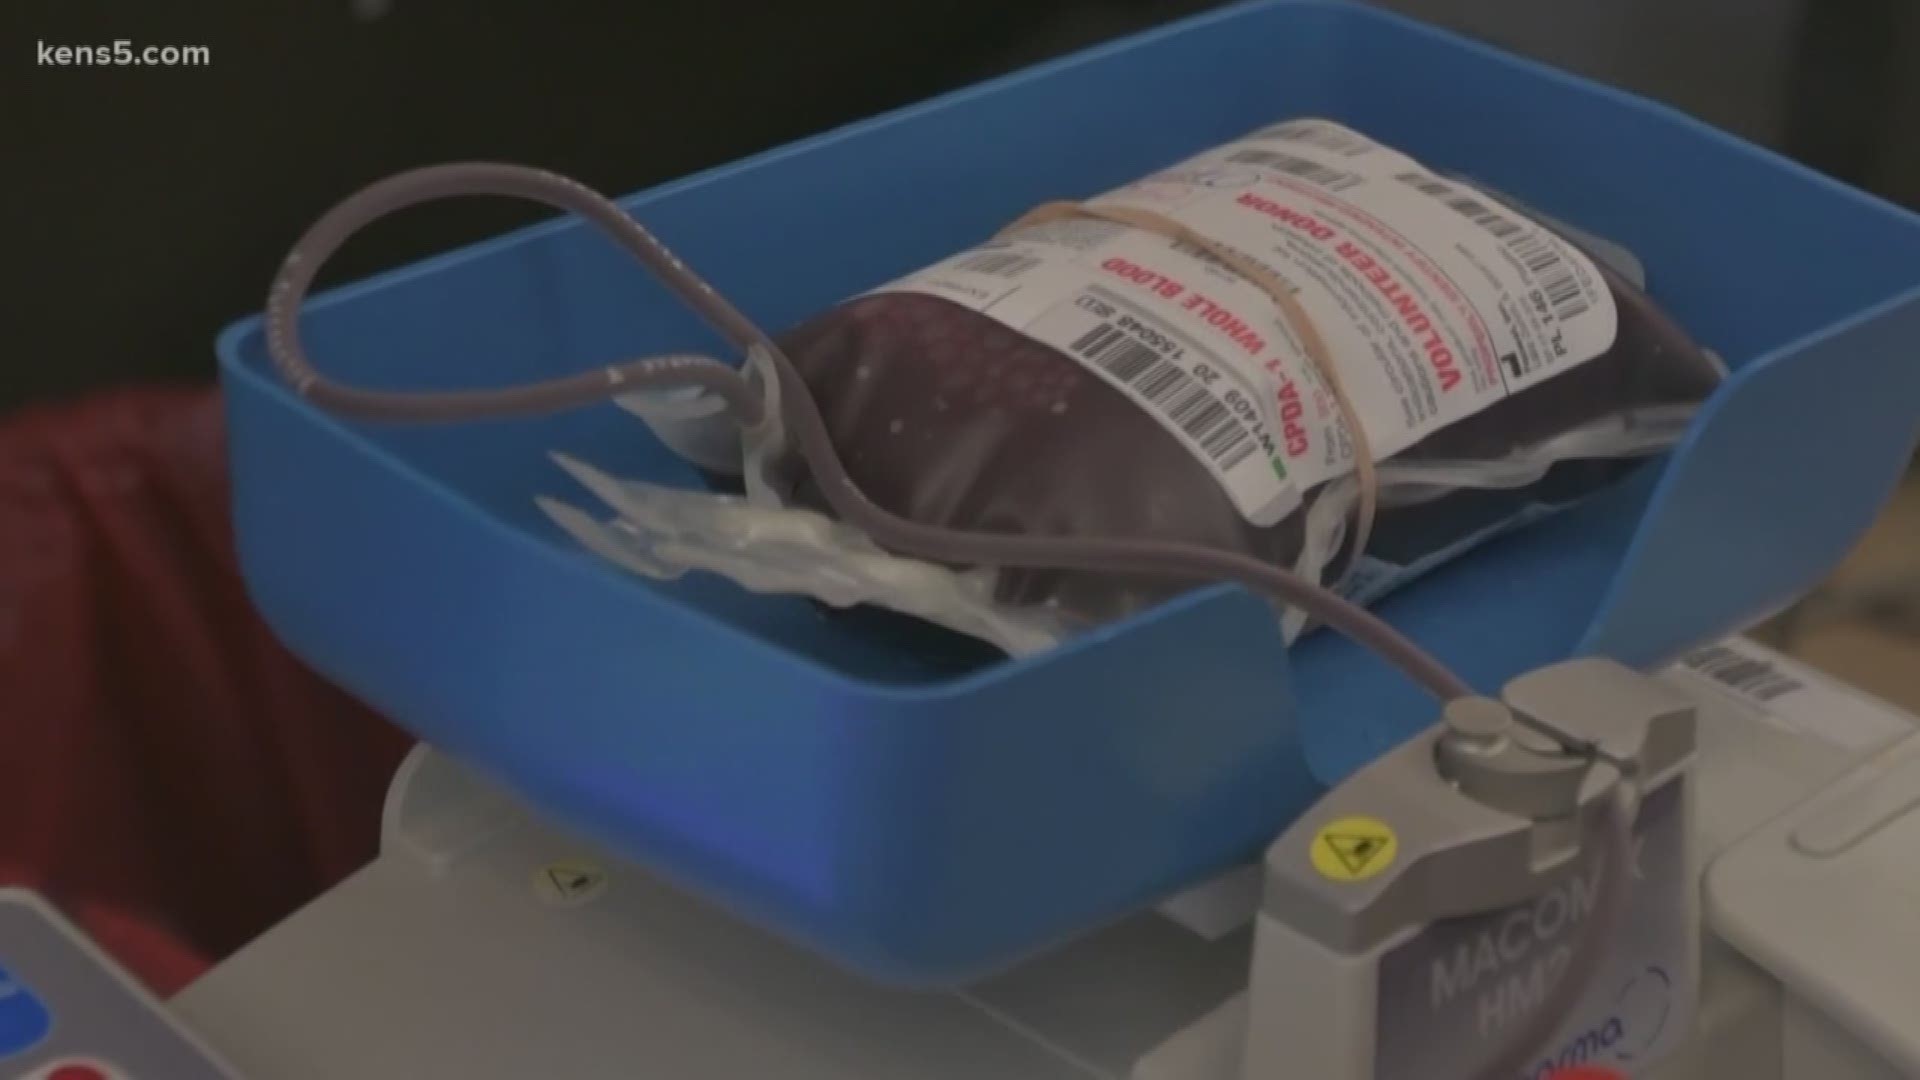 The South Texas Blood and Tissue Center is putting out the call for blood after a drop in supply. Officials say this may be due to coronavirus concerns.